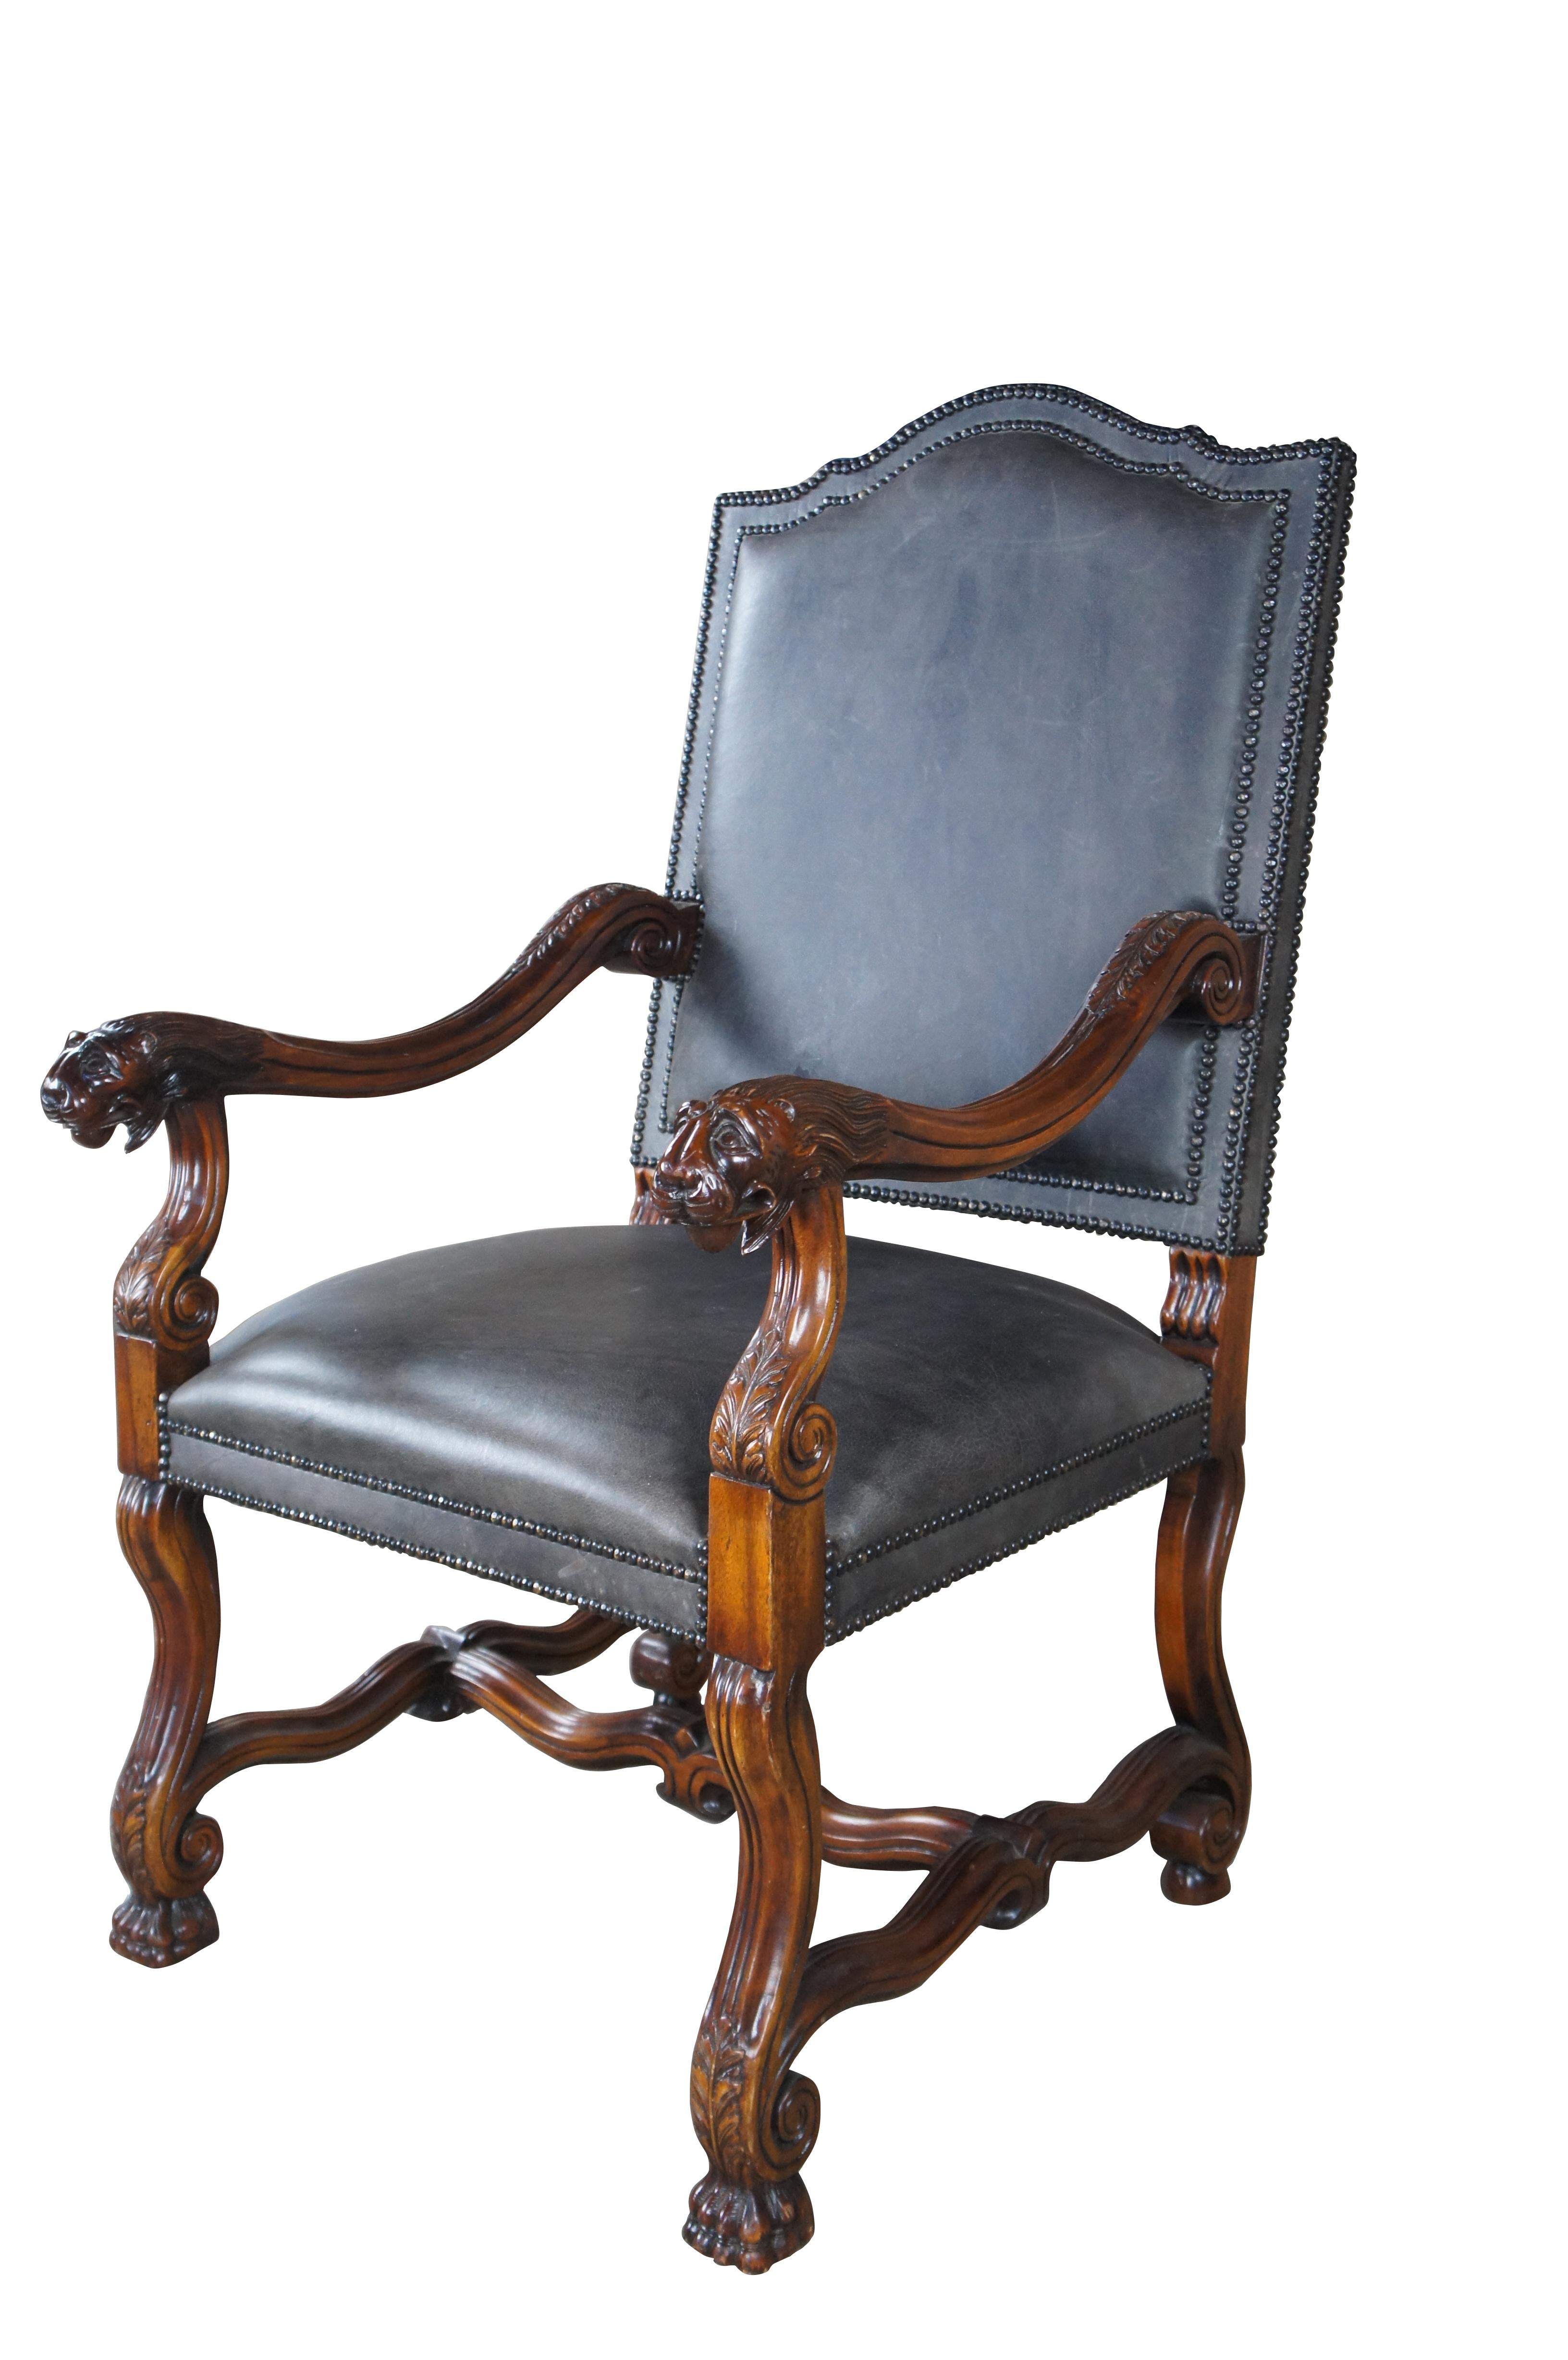 An Exquisite Theodore Alexander Throne Chair, circa late 20th Century. Inspired by 17th Century Italian Tuscan and Spanish designs. Features a mahogany frame with high back and contoured crest rail. Acanthus carved arms are scrolled and downswept